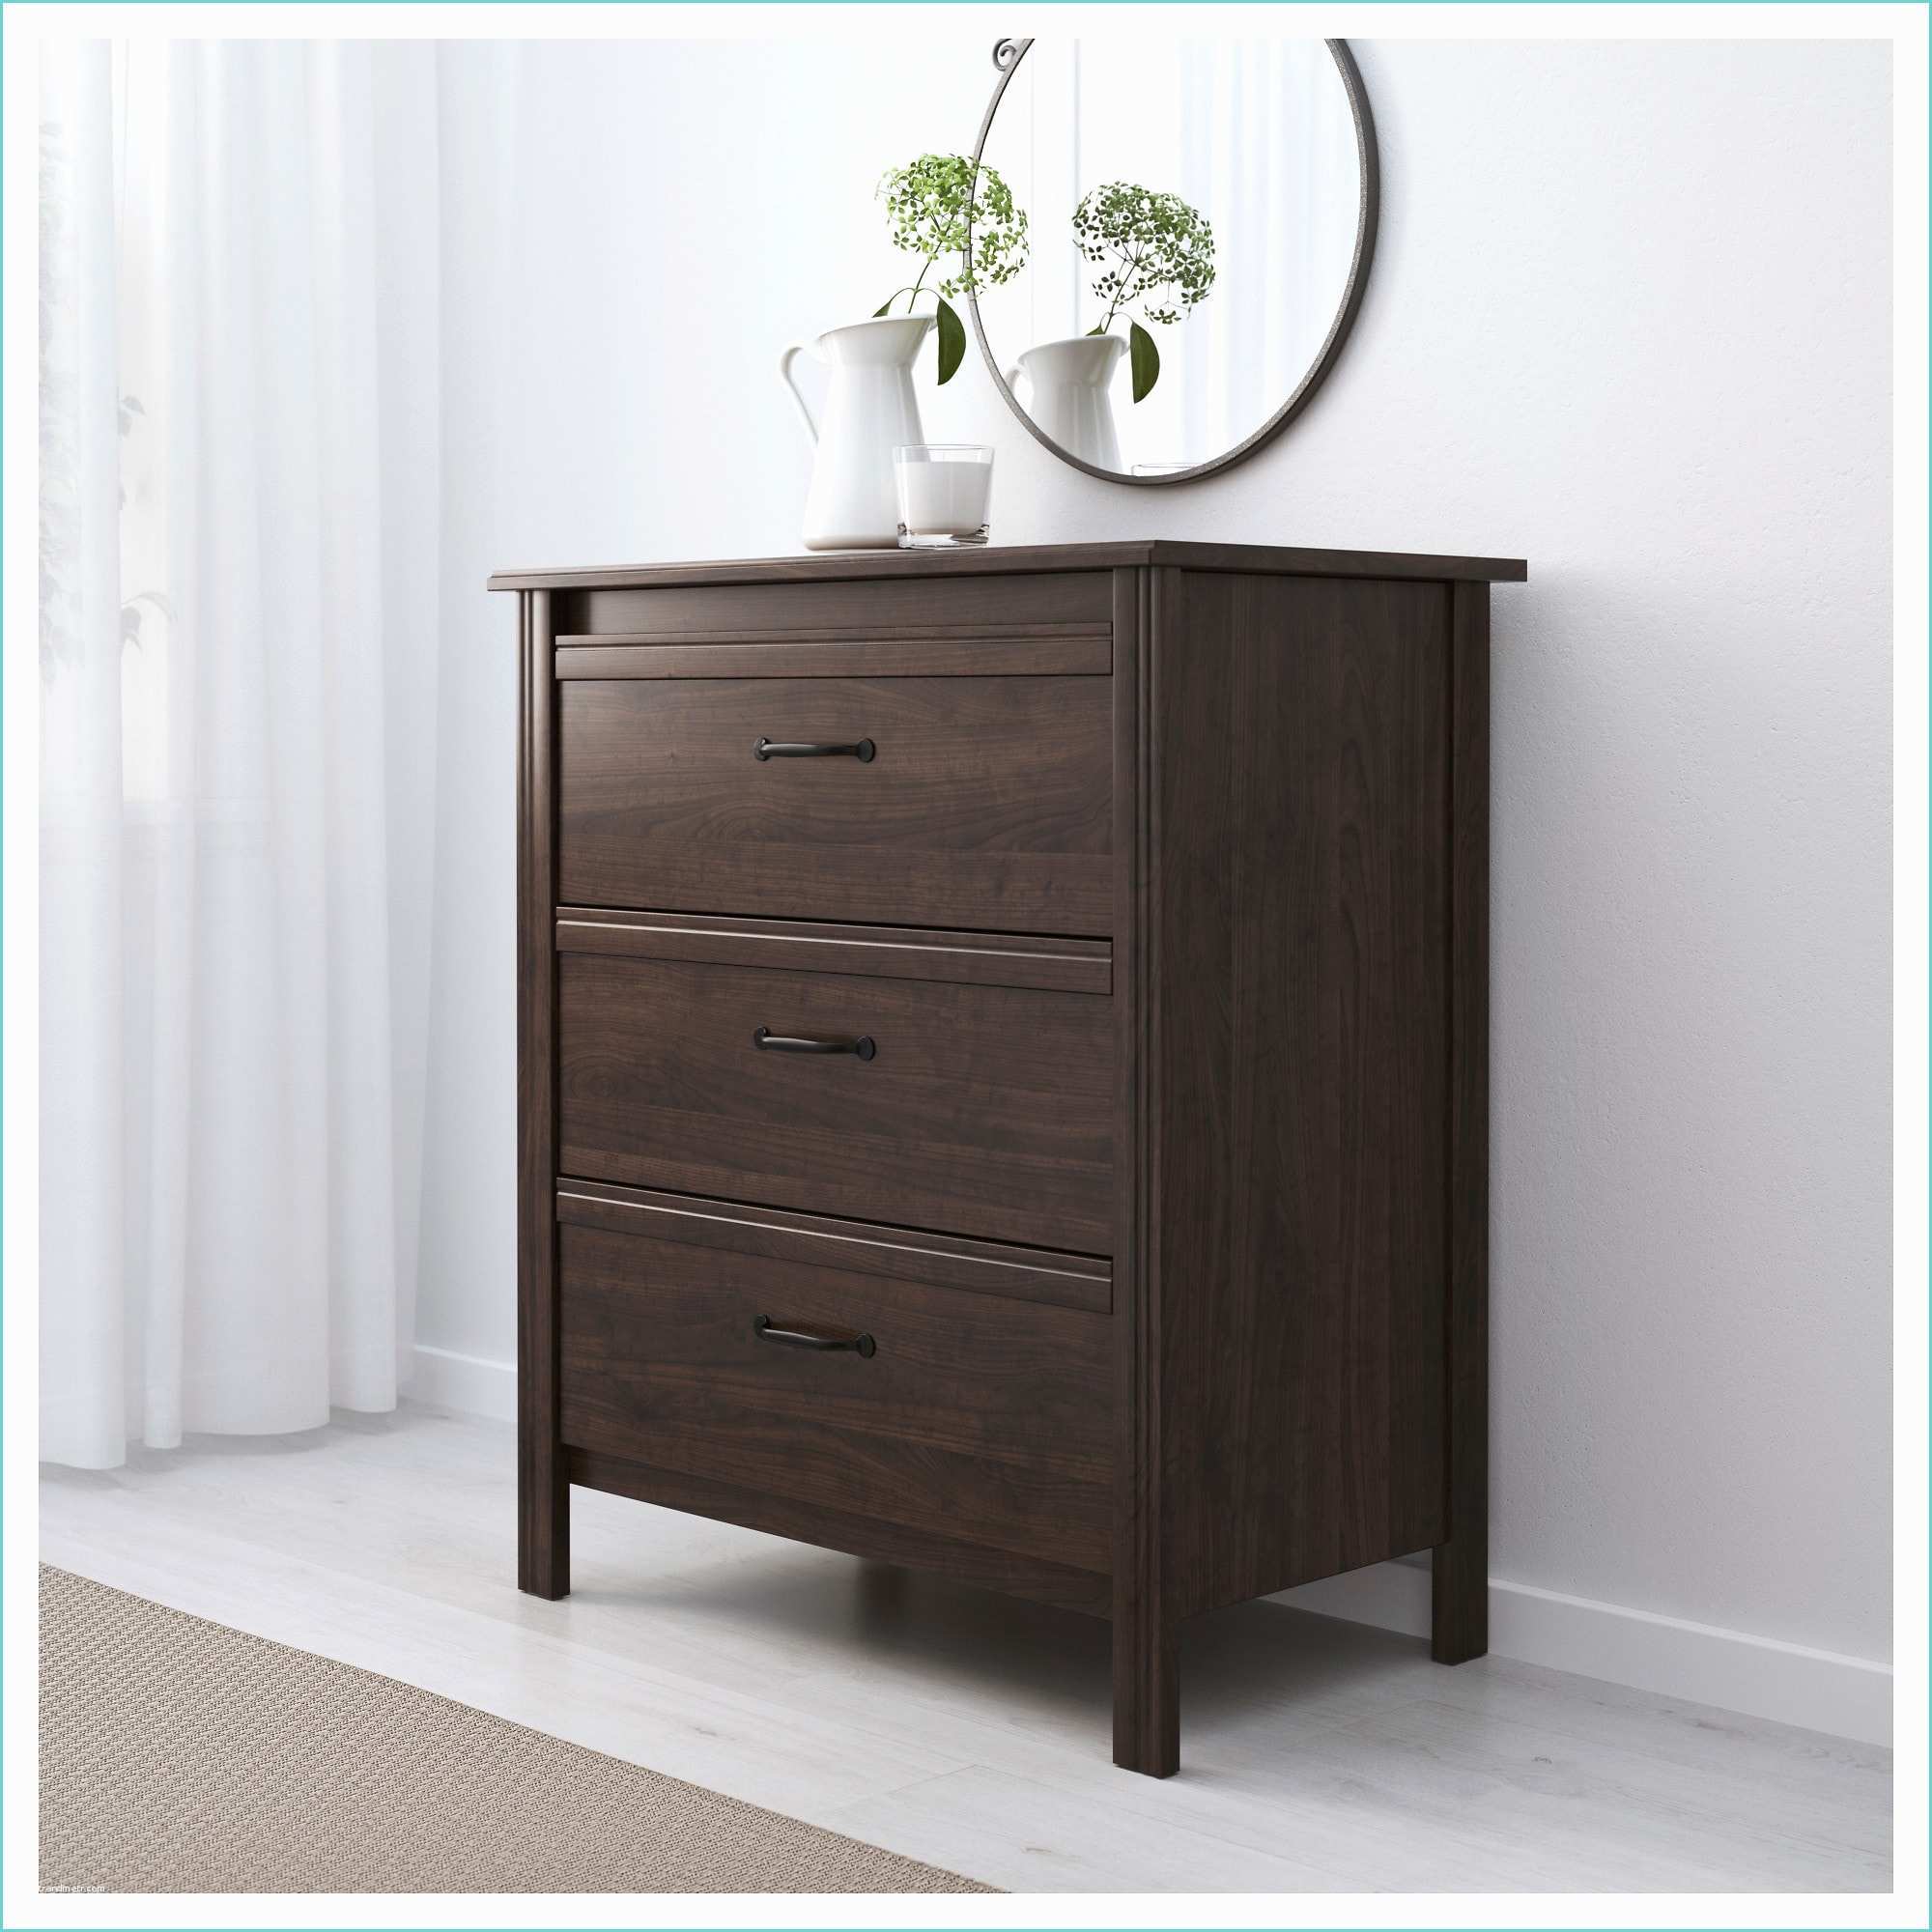 Ikea Brusali Chest Of Drawers Brusali Chest Of 3 Drawers Brown 80x93 Cm Ikea